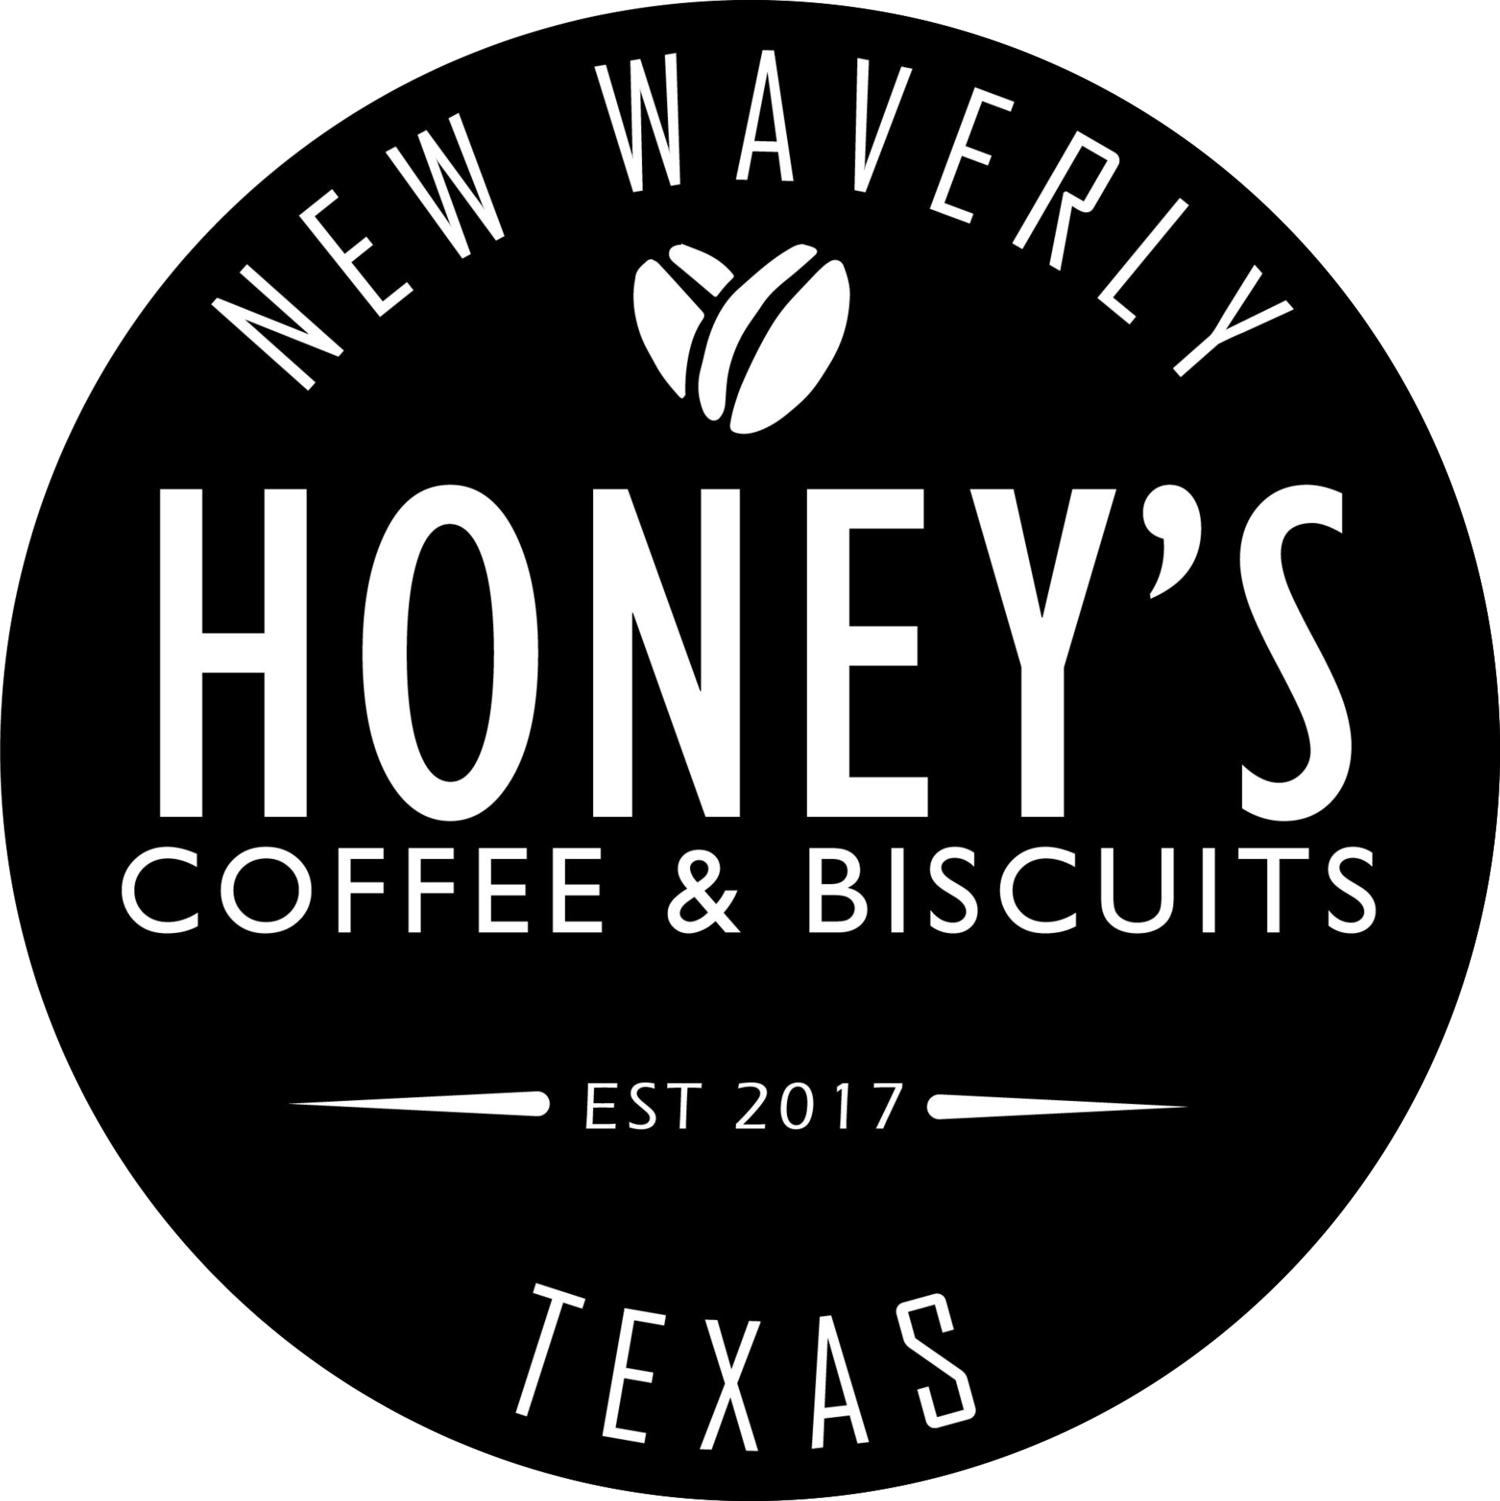 Honey's Coffee & Biscuits